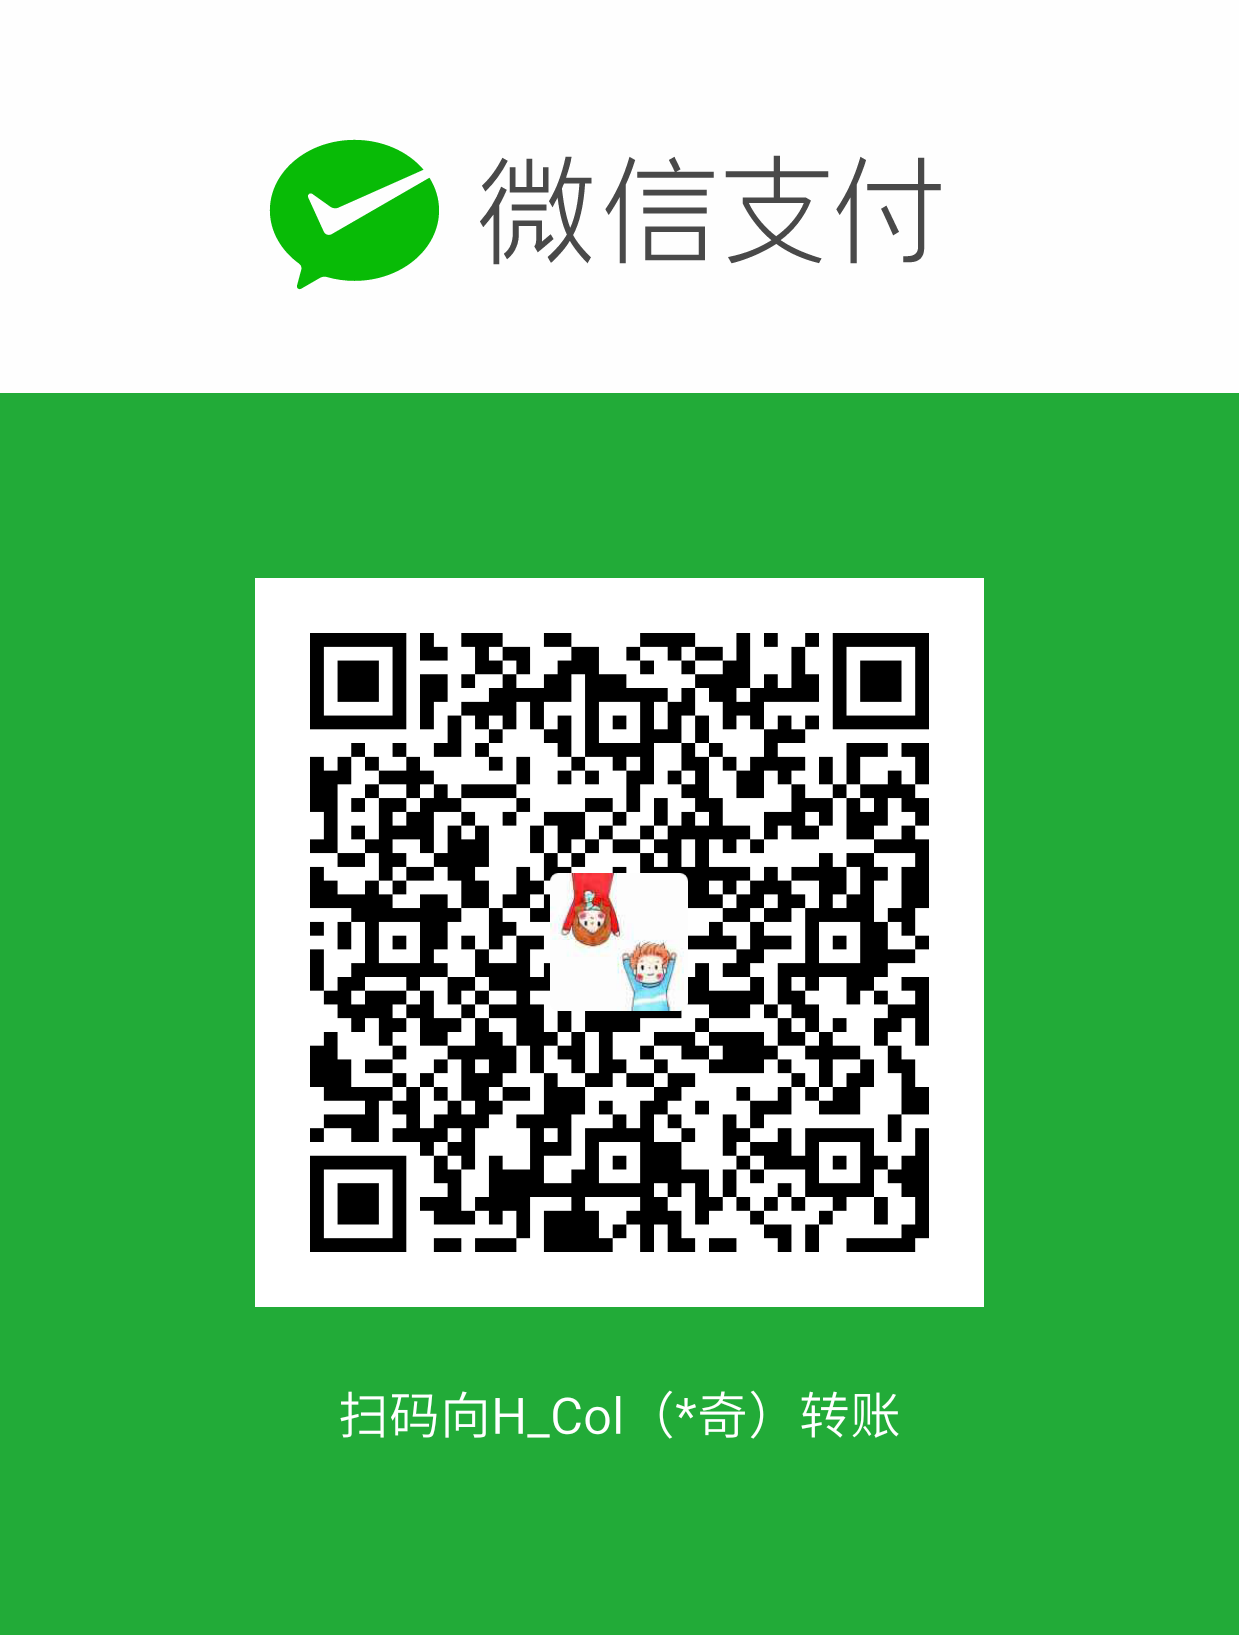 HCol WeChat Pay